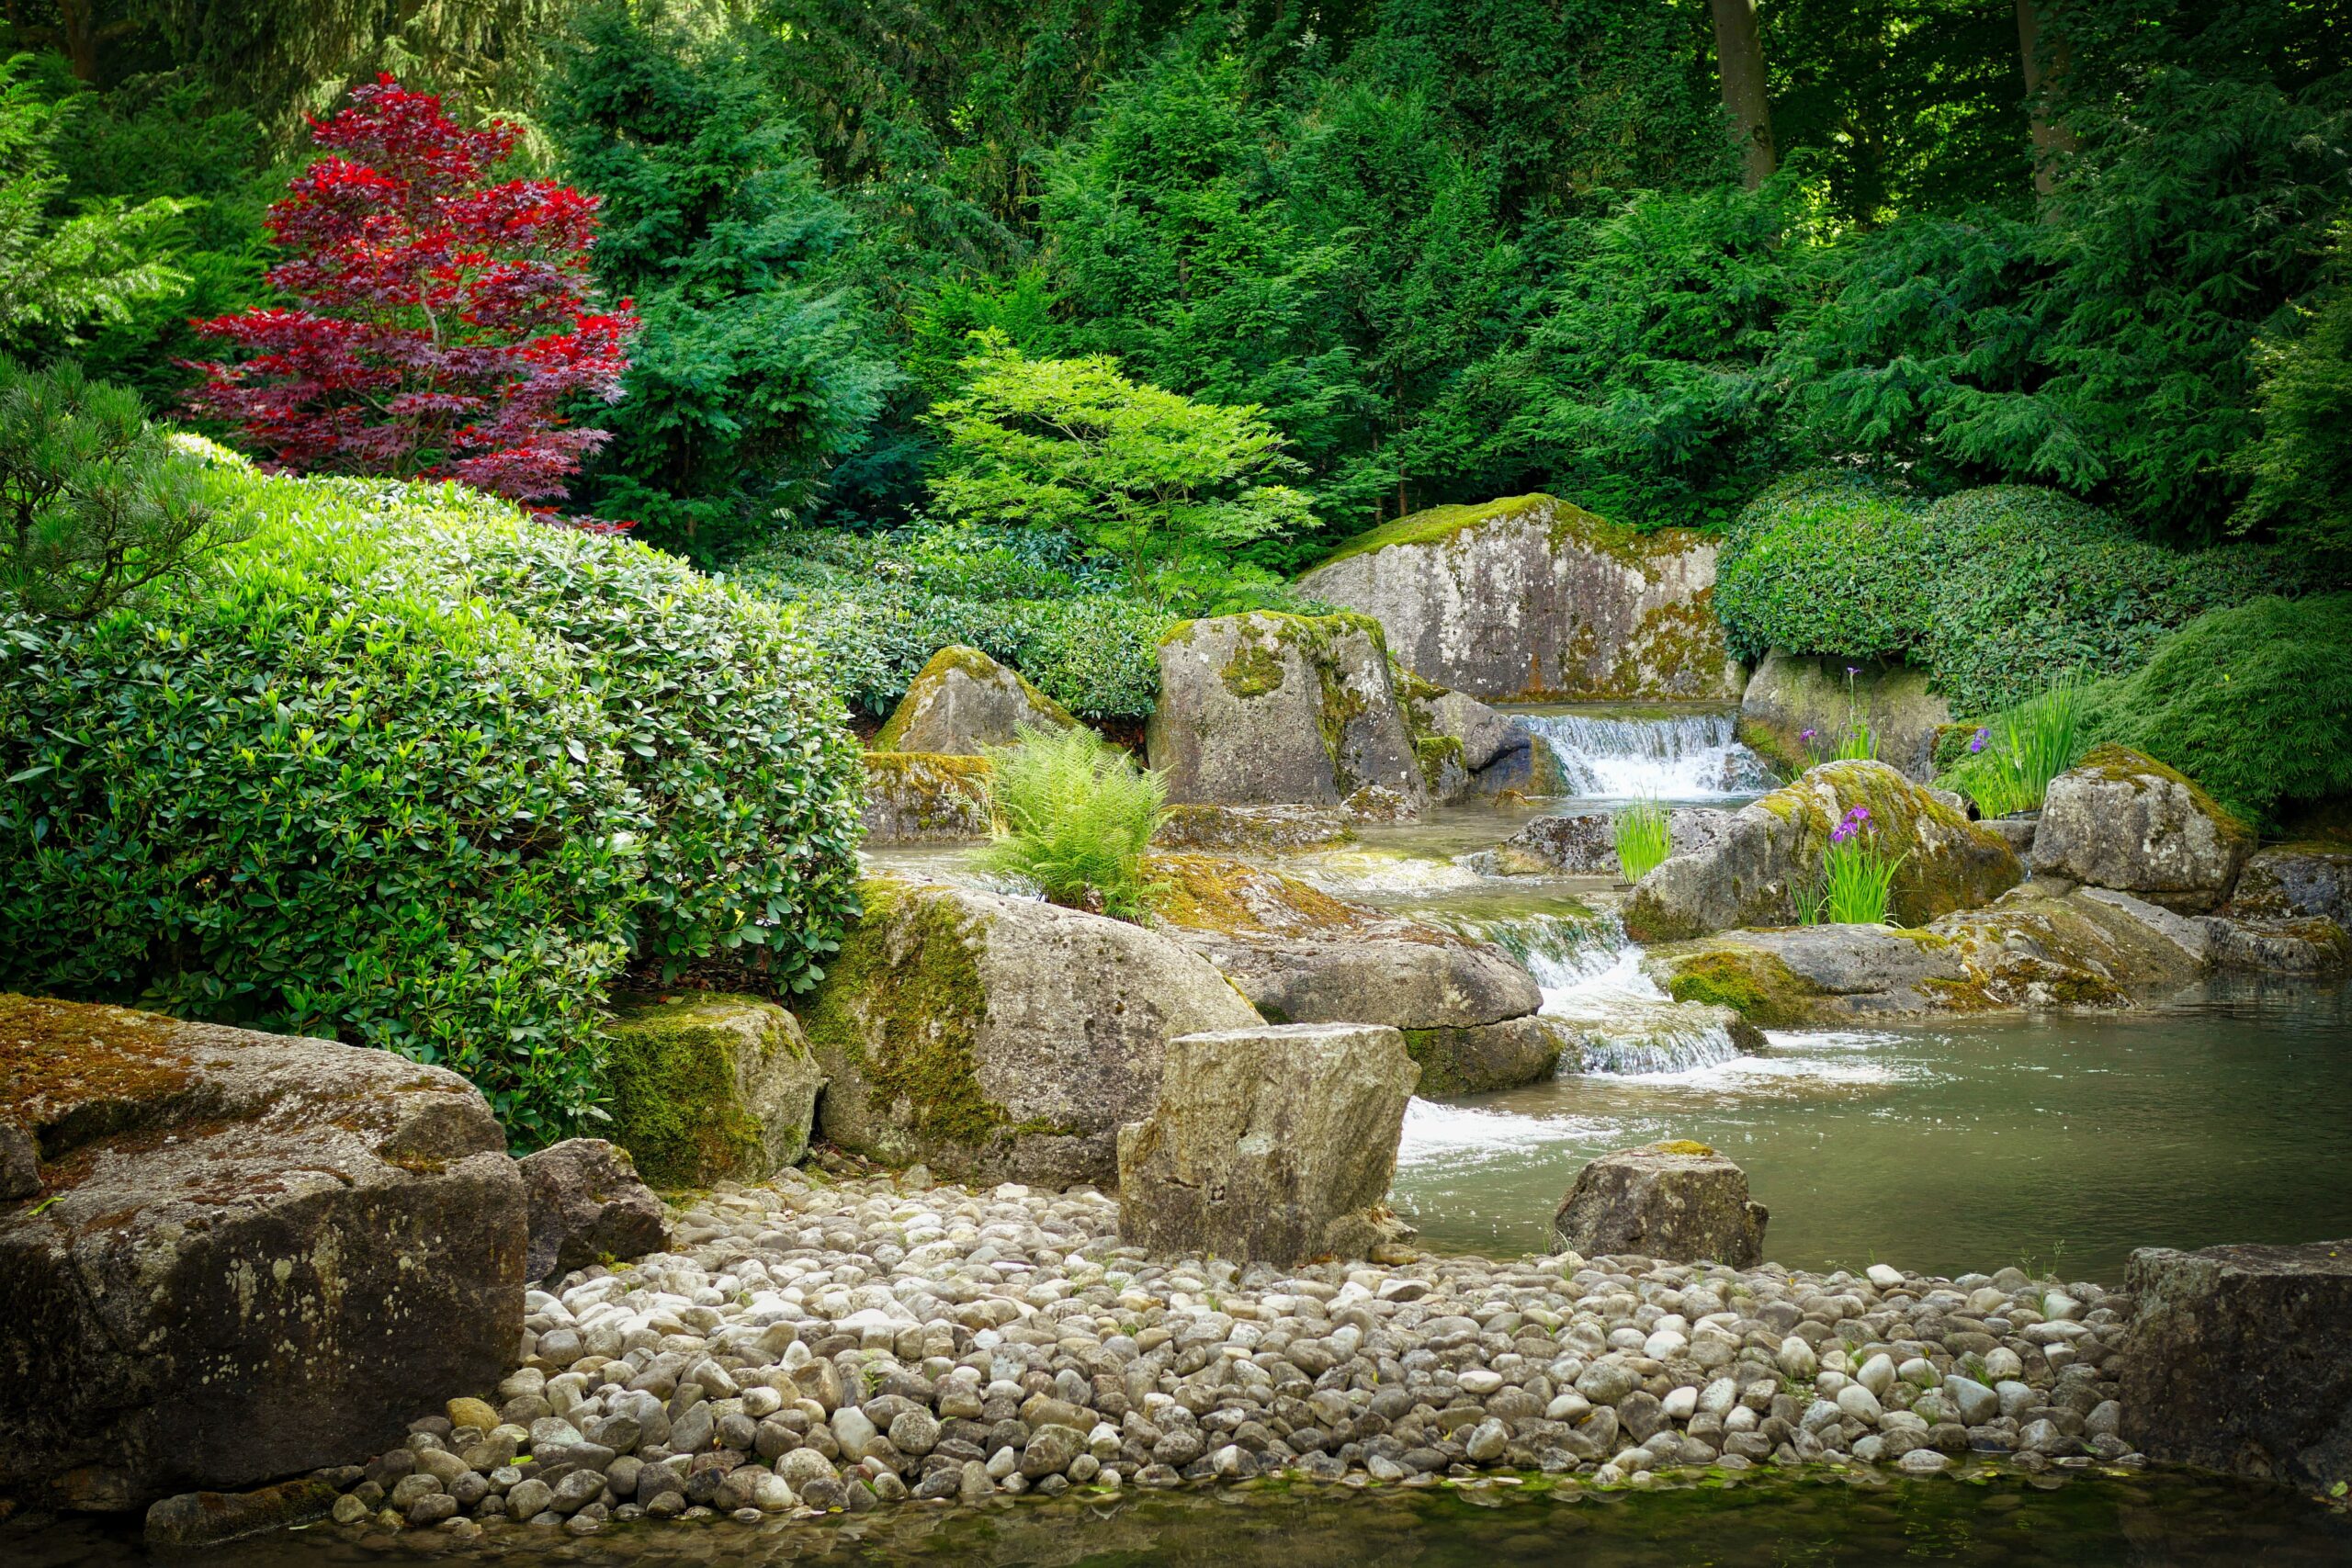 Planning a rock garden can take your landscaping projects to new levels